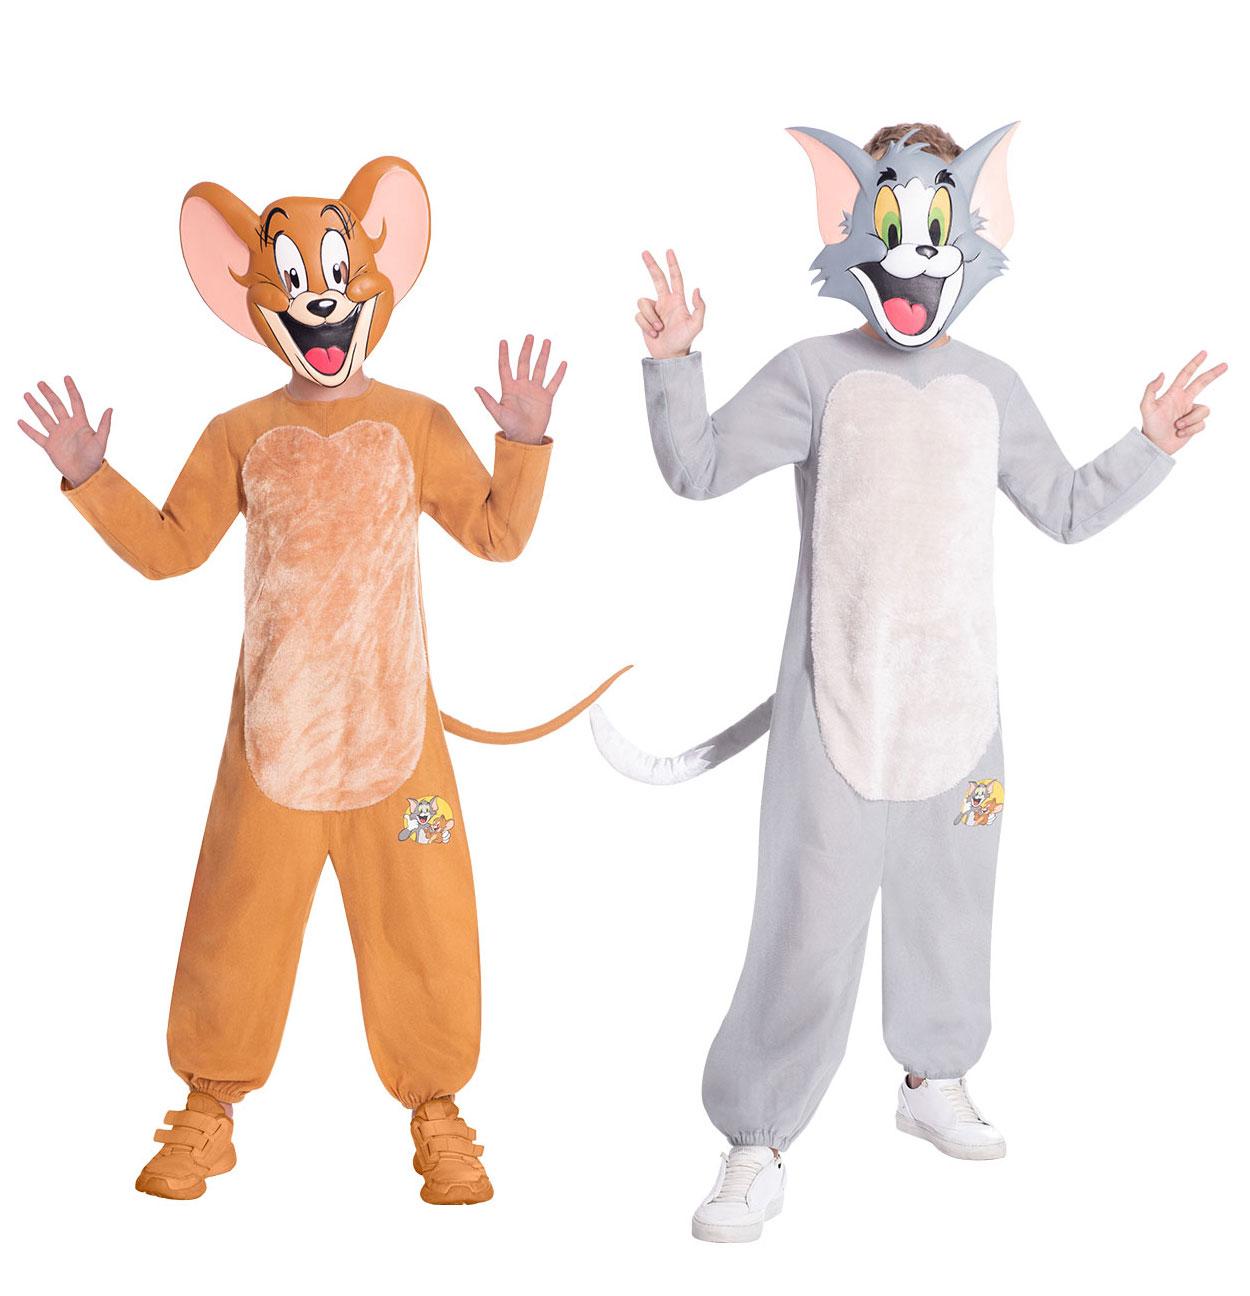 Kid's fully licensed Tom and Jerry Fancy Dress Costumes by Amscan available here at Karnival Costumes online party shop